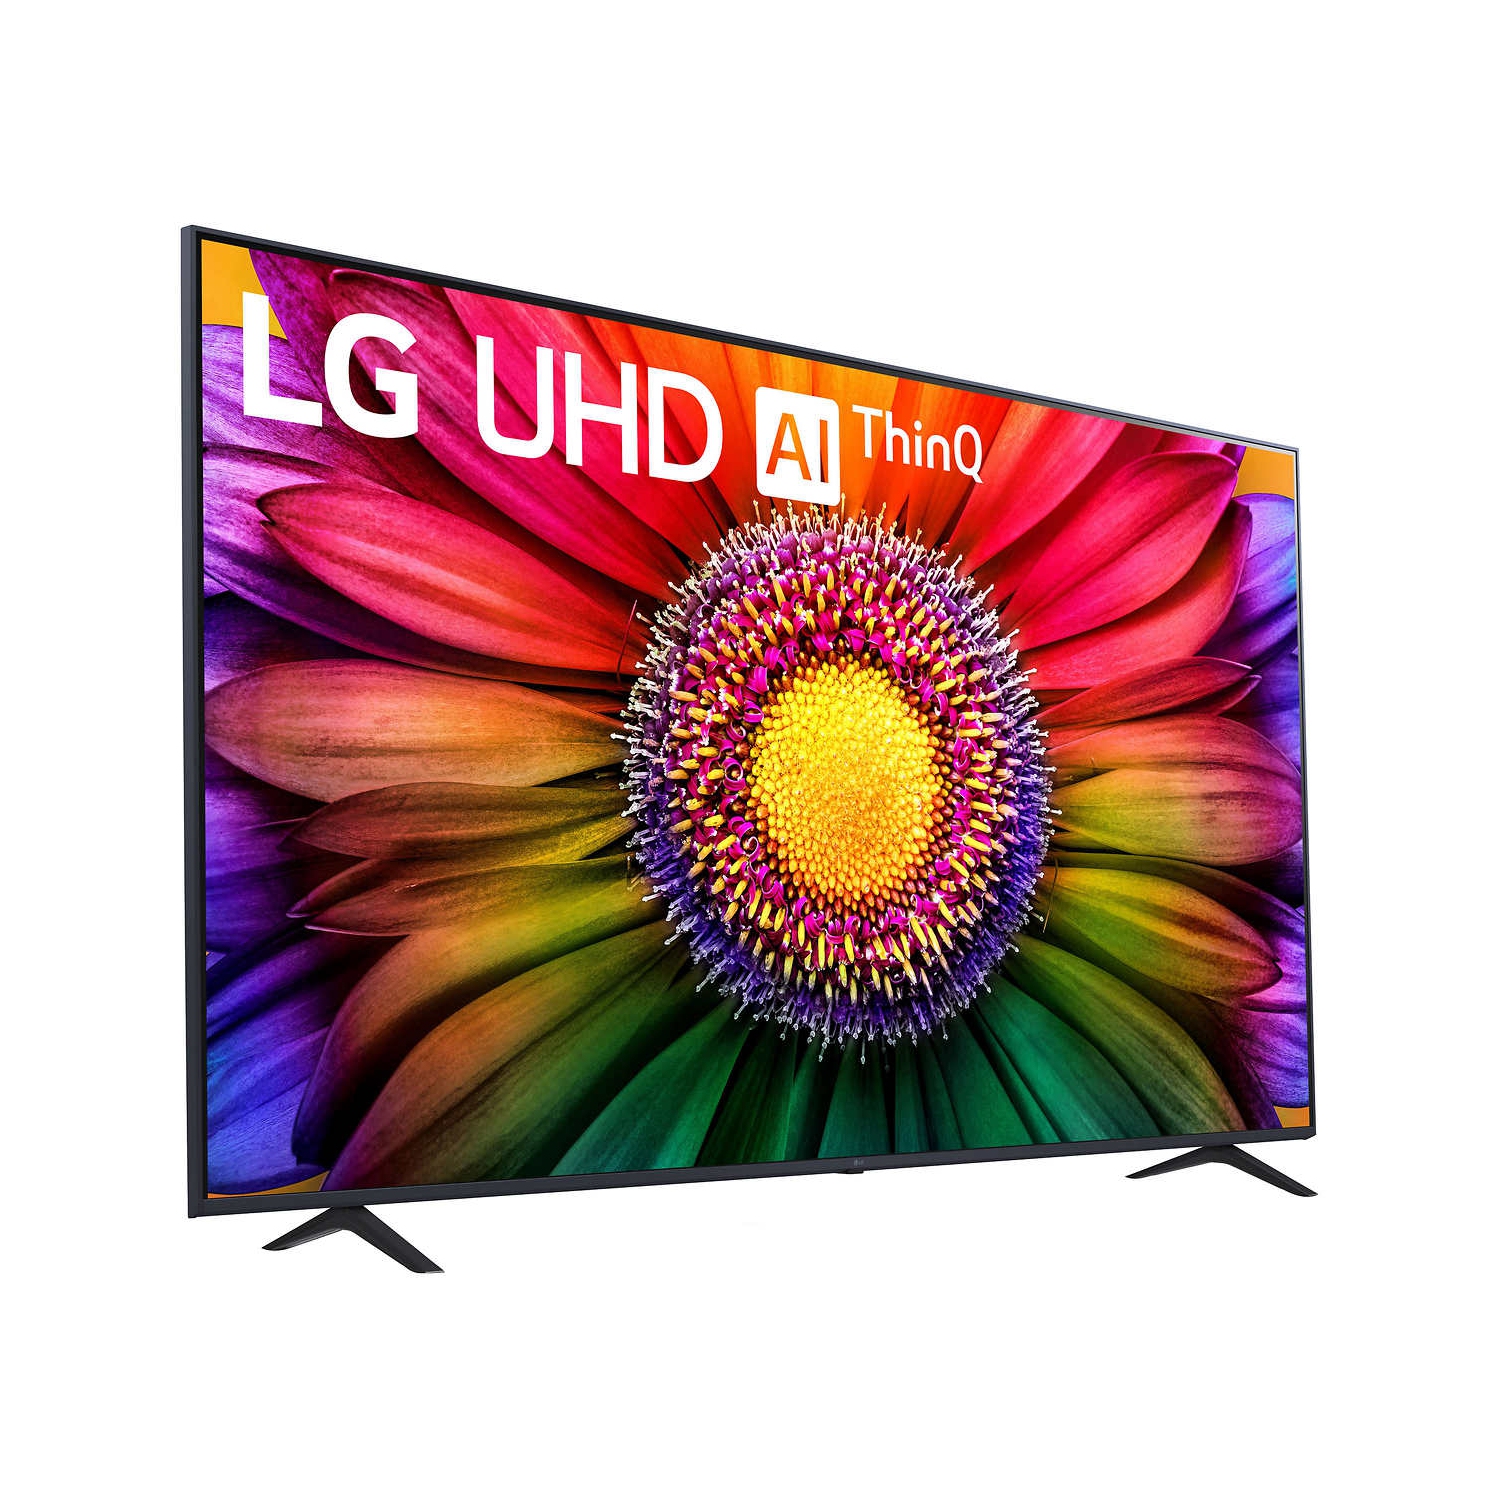 REFURBISHED (GOOD) -LG 86" Class UR8000 series LED 4K UHD Smart webOS 23 w/ ThinQ AI TV ( 86UR8000AUA )**LOCAL VANCOUVER DELIVERY ONLY**